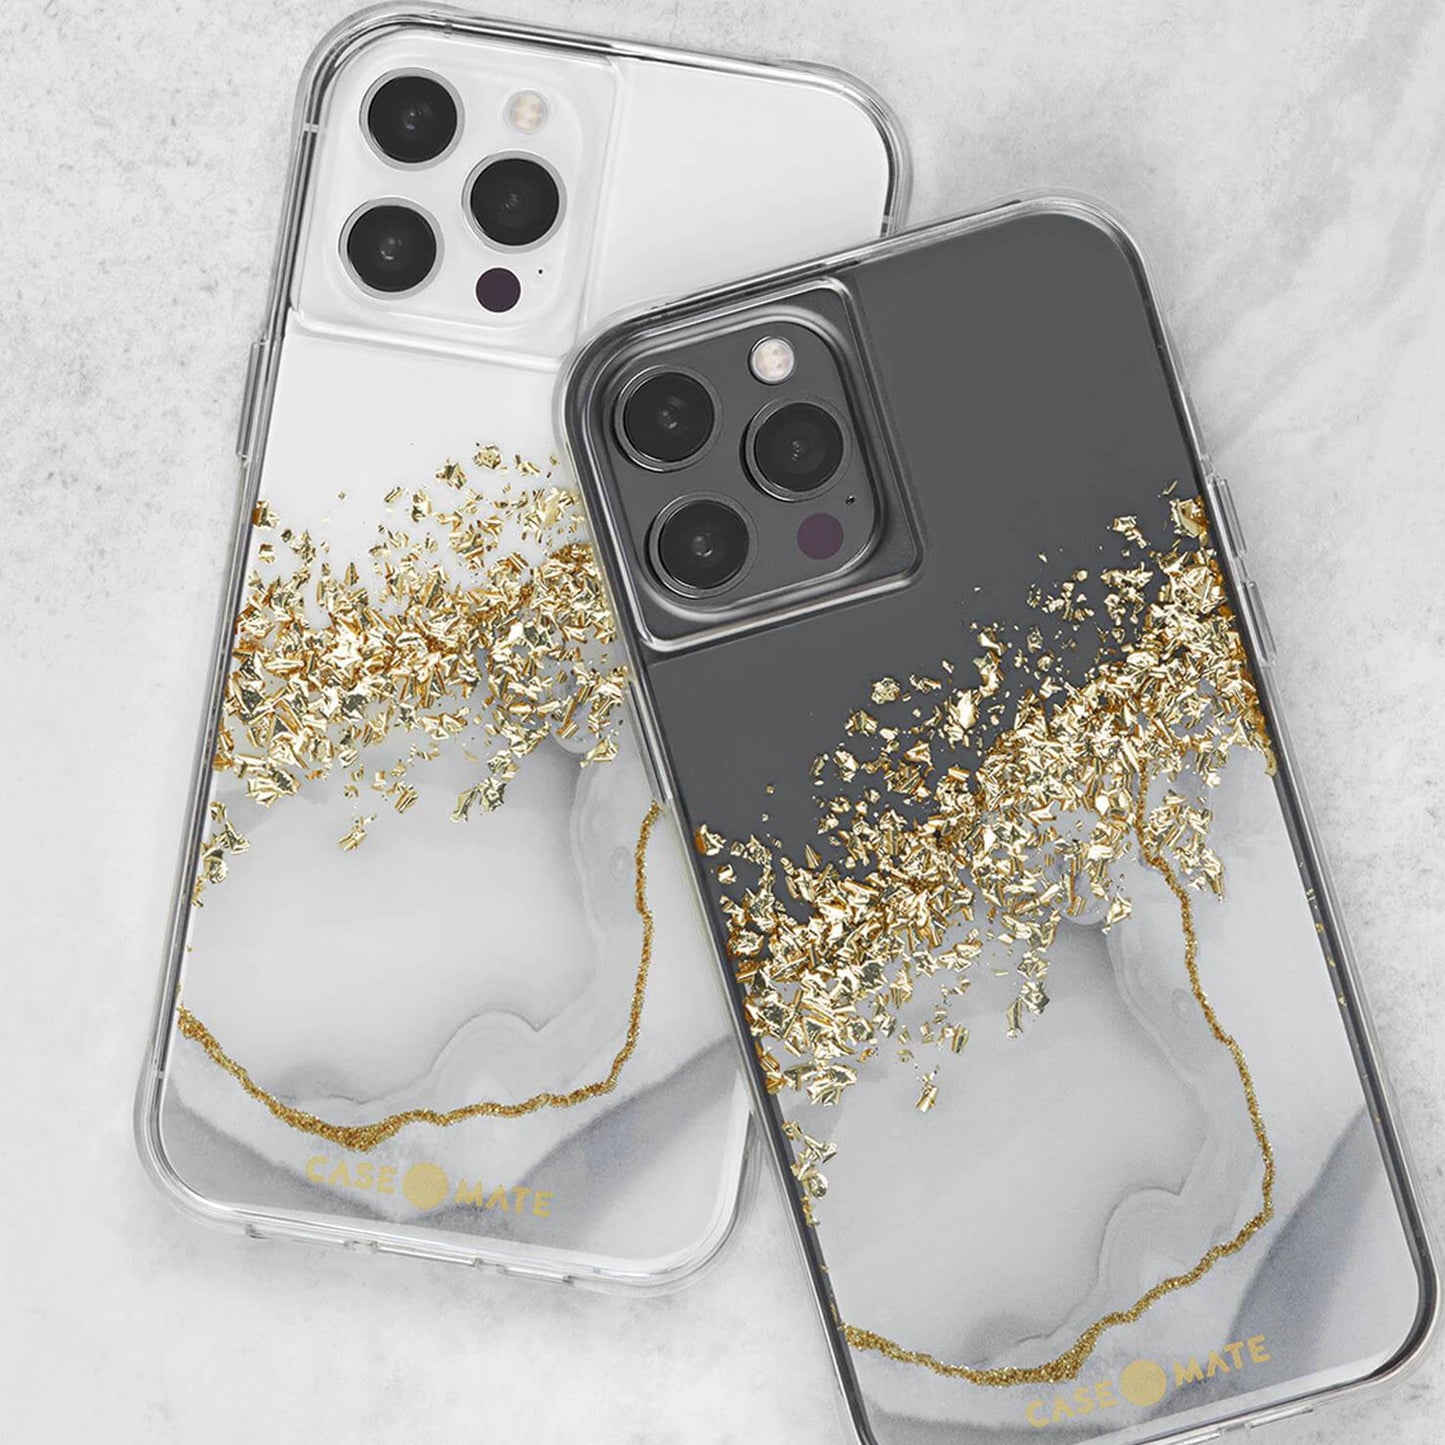 Case-Mate Karat Marble for iPhone 13 Pro Max 6.7" 5G with Antimicrobial  (Barcode: 840171706239 )